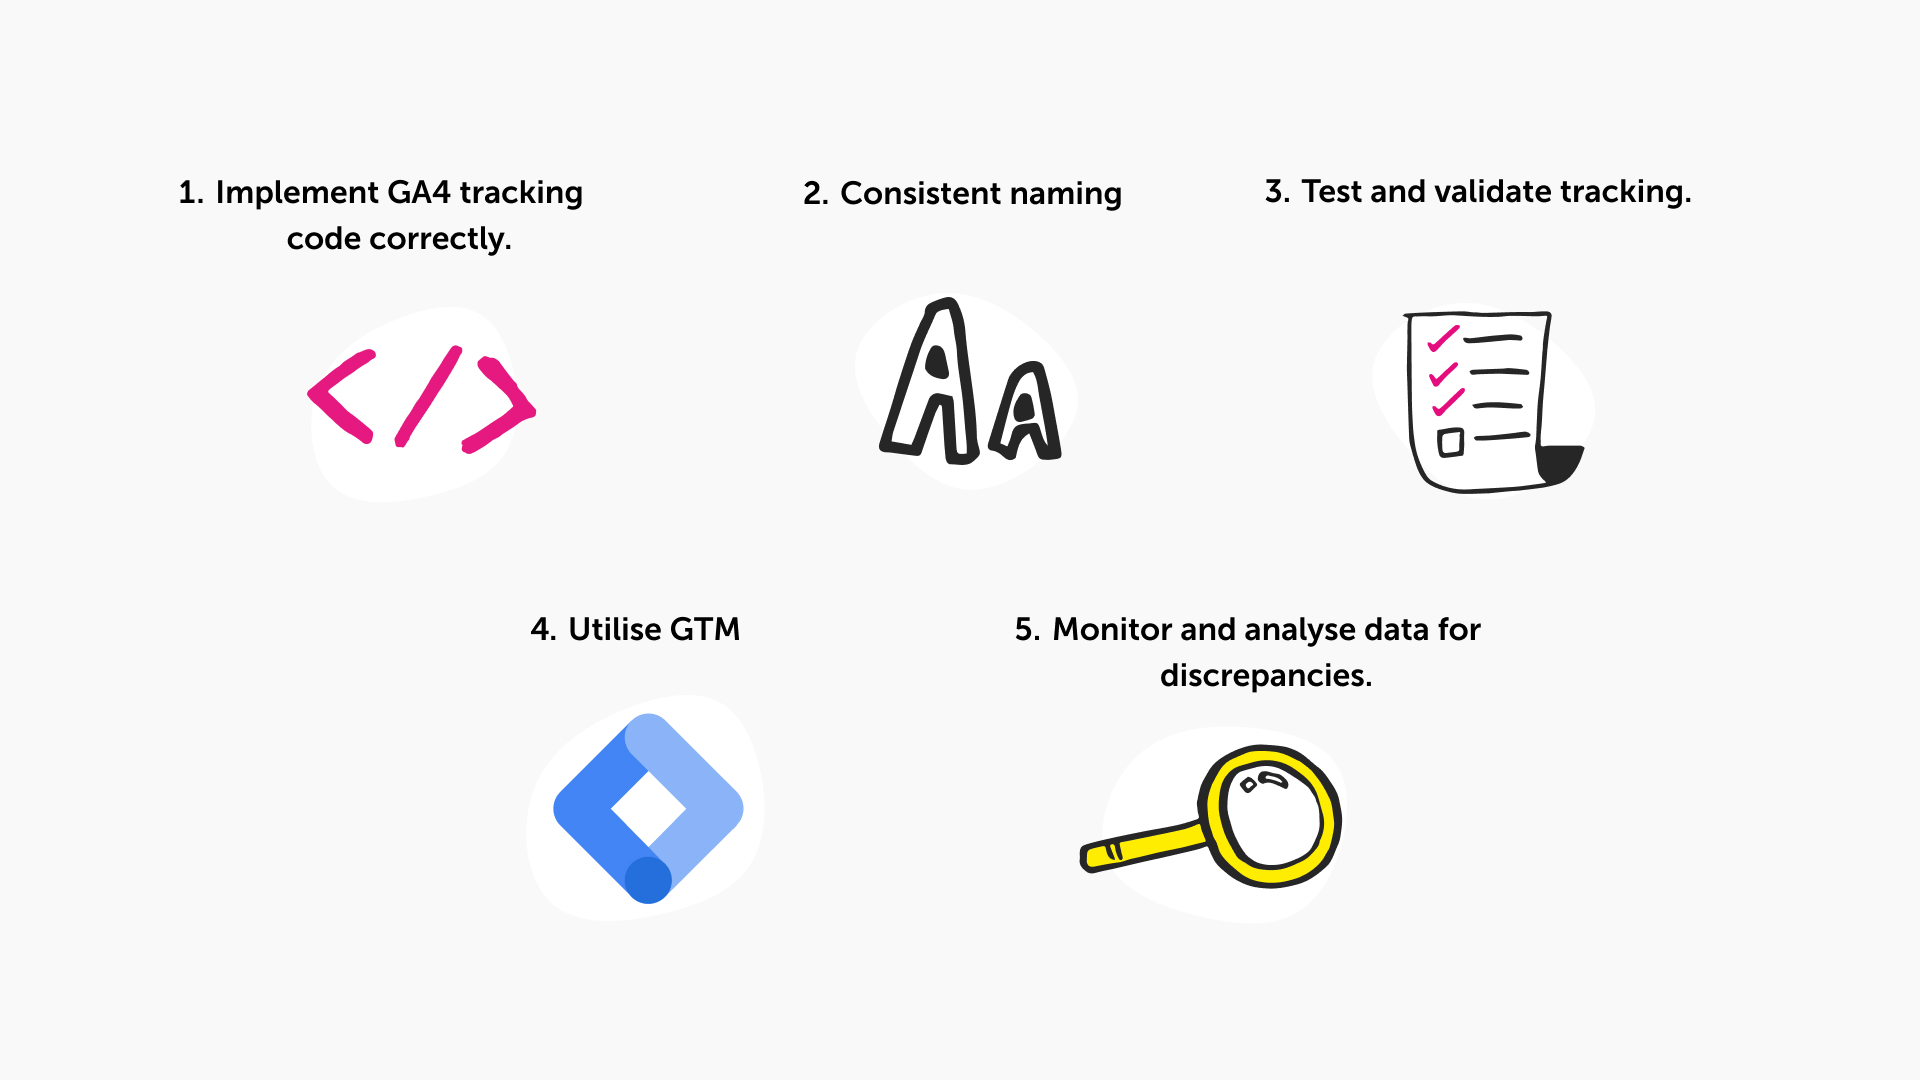 The image displays a list of five best practices for accurate tracking in web analytics, each accompanied by an icon: 1 Implement GA4 tracking code correctly - represented by code brackets. 2 Consistent naming - illustrated by the letters 'Aa' indicating the importance of uniform naming conventions. 3 Test and validate tracking - shown with a checklist on a clipboard, emphasising the need to check that tracking is set up properly. 4 Utilise GTM - Google Tag Manager logo, suggesting the use of GTM for managing and deploying marketing tags. 5 Monitor and analyse data for discrepancies - depicted by a magnifying glass, indicating the need to closely inspect data for any irregularities. This visual guide serves as a reminder of the key steps in ensuring that web analytics tracking is accurate and reliable.